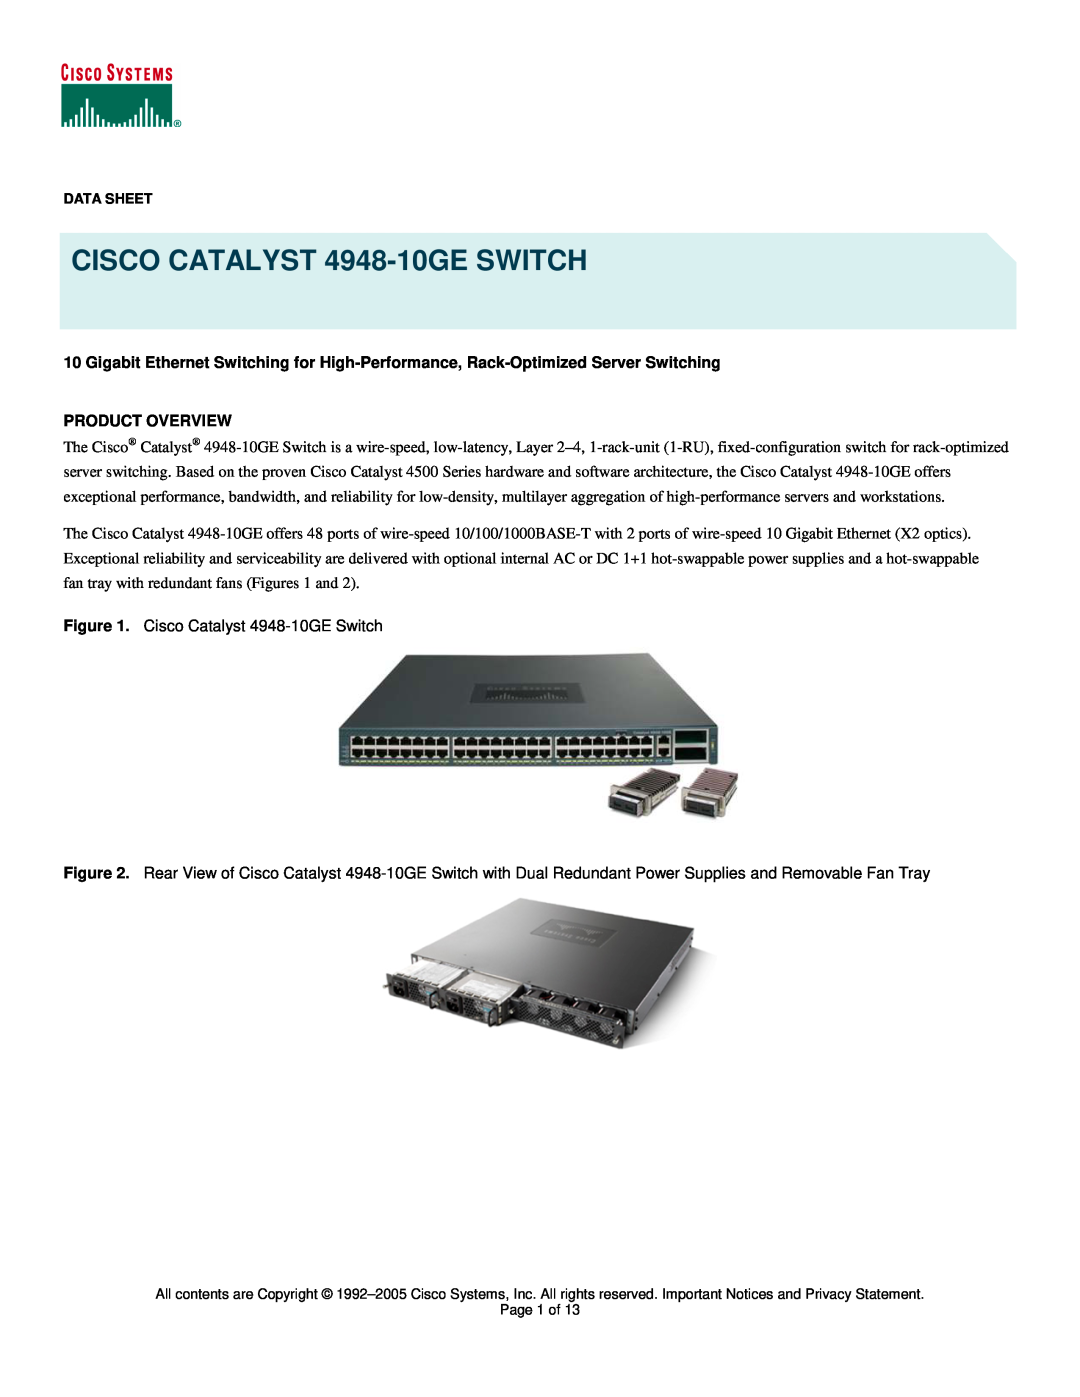 Cisco Systems manual Product Overview, CISCO CATALYST 4948-10GE SWITCH 